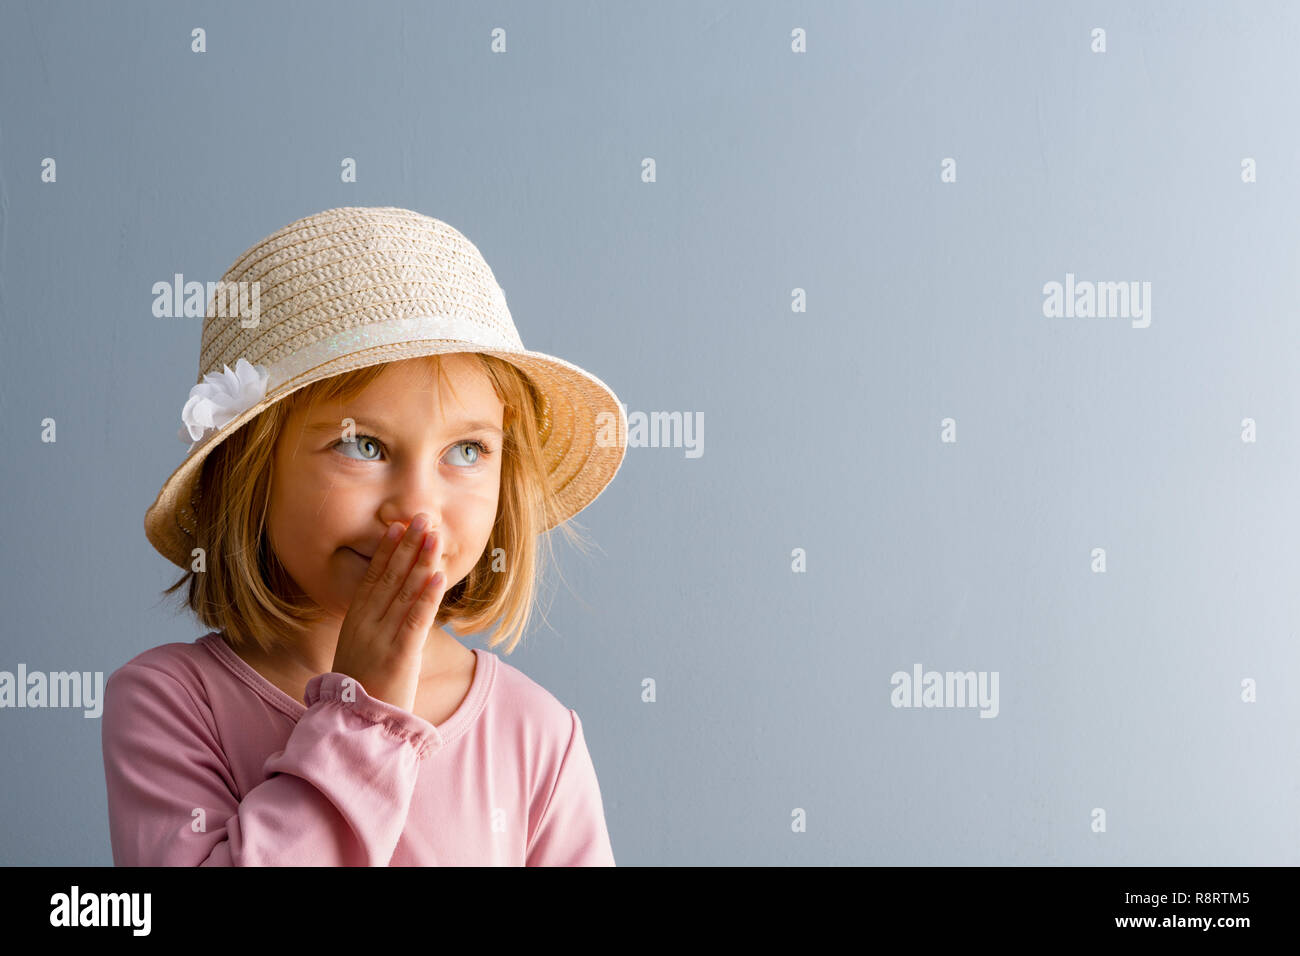 Adorable little four year old girl wearing an elegant straw hat whispering a secret with her hand to her mouth over blue with copy space Stock Photo